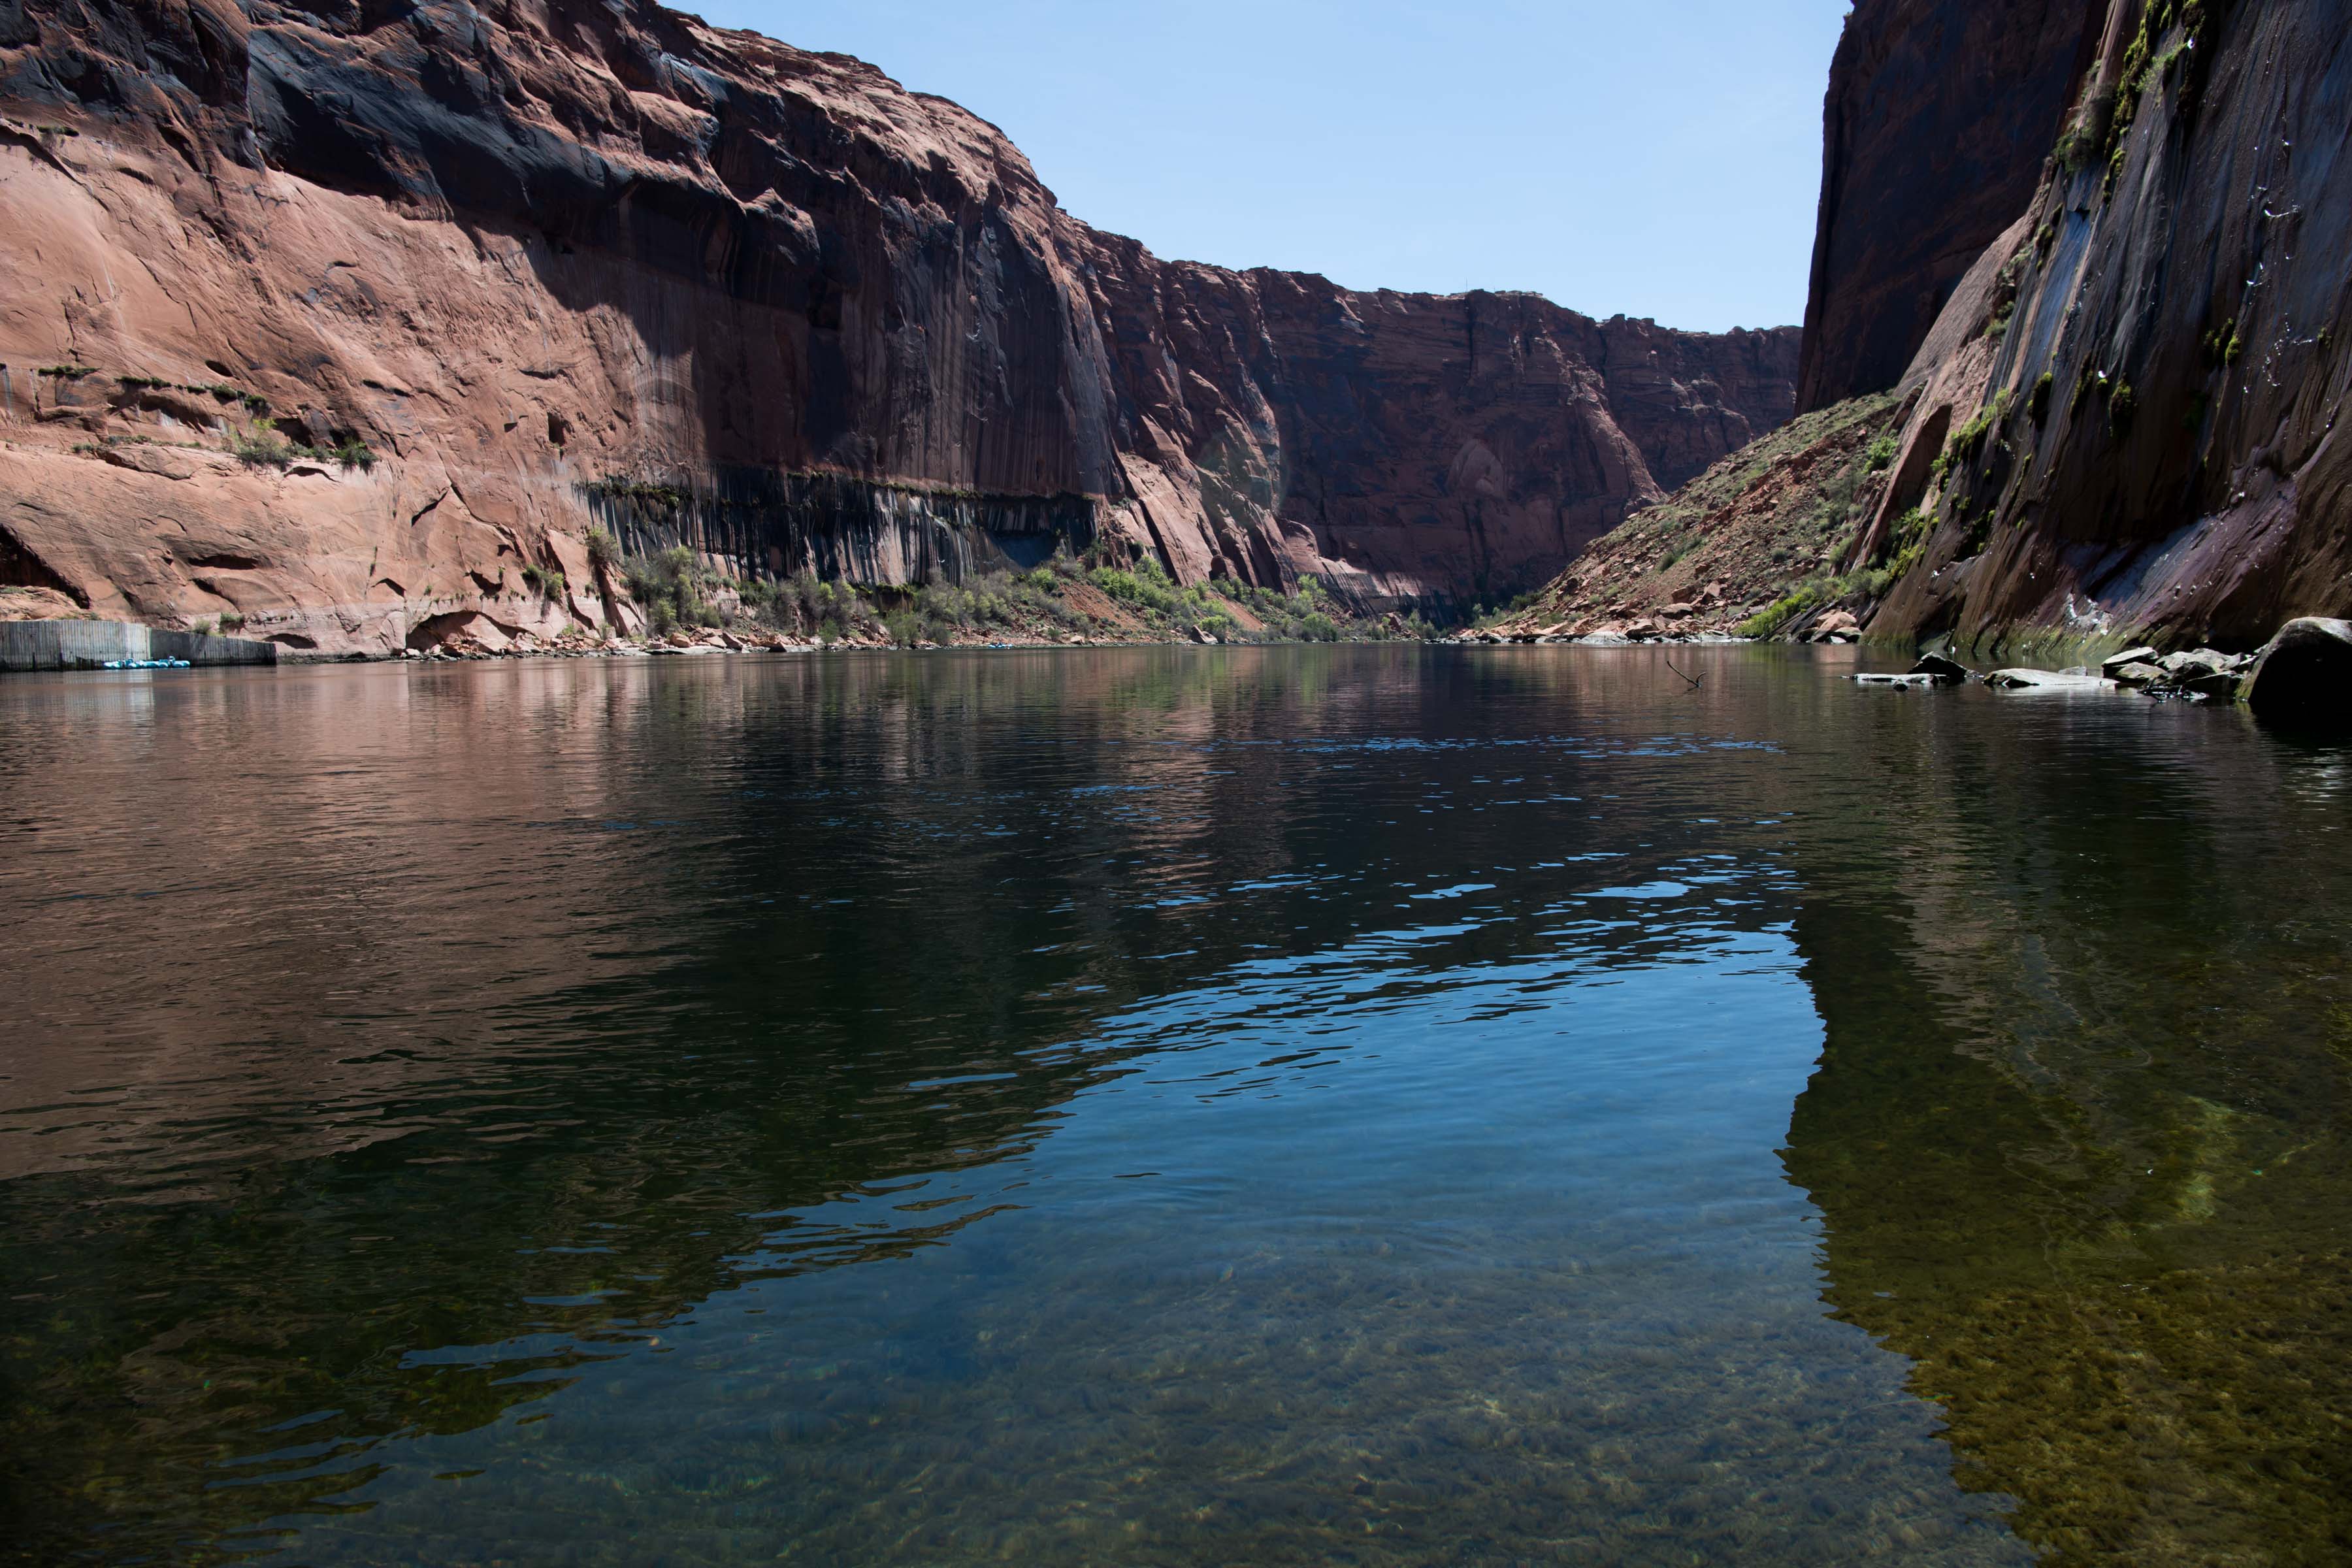 The Colorado River below Glen Canyon Dam before you arrive at Lees Ferry. A new study has found that the Colorado River experienced a severe drought impacting the Upper Colorado River Basin in the second century. Reclamation/Alex Stephens